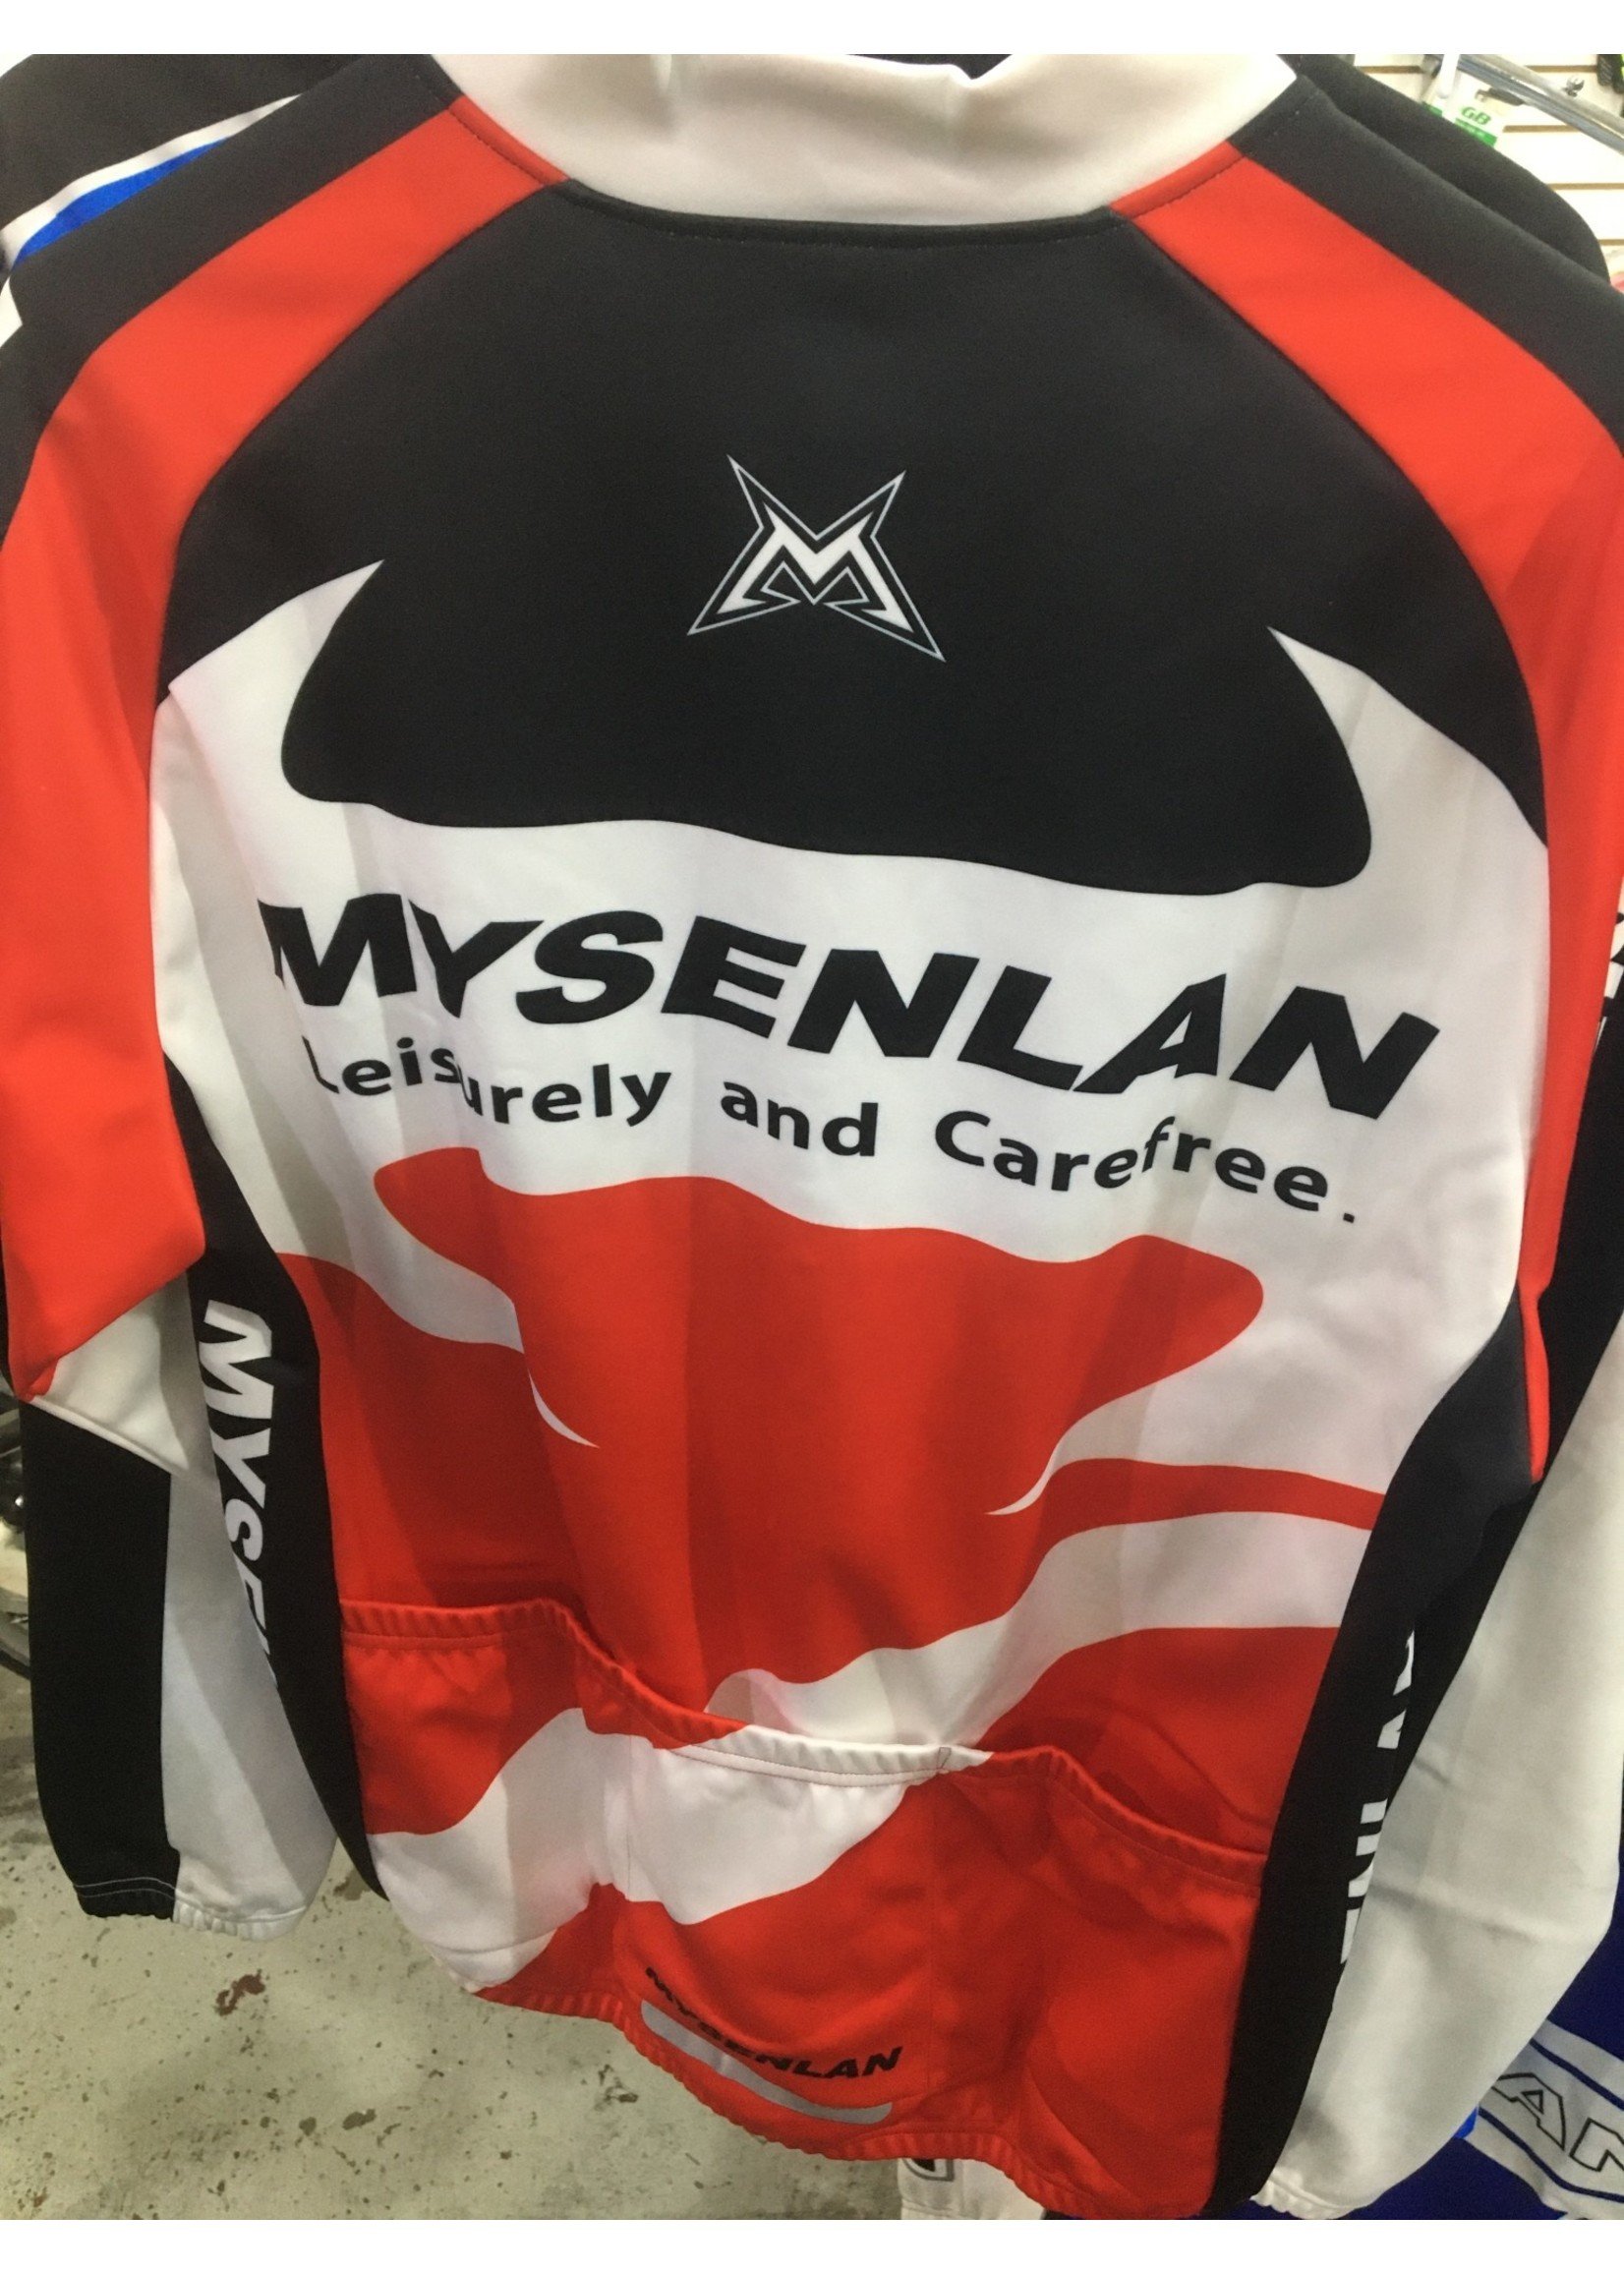 Mysenlan Red/Black/White Jacket "Lesiurely and Carefree"